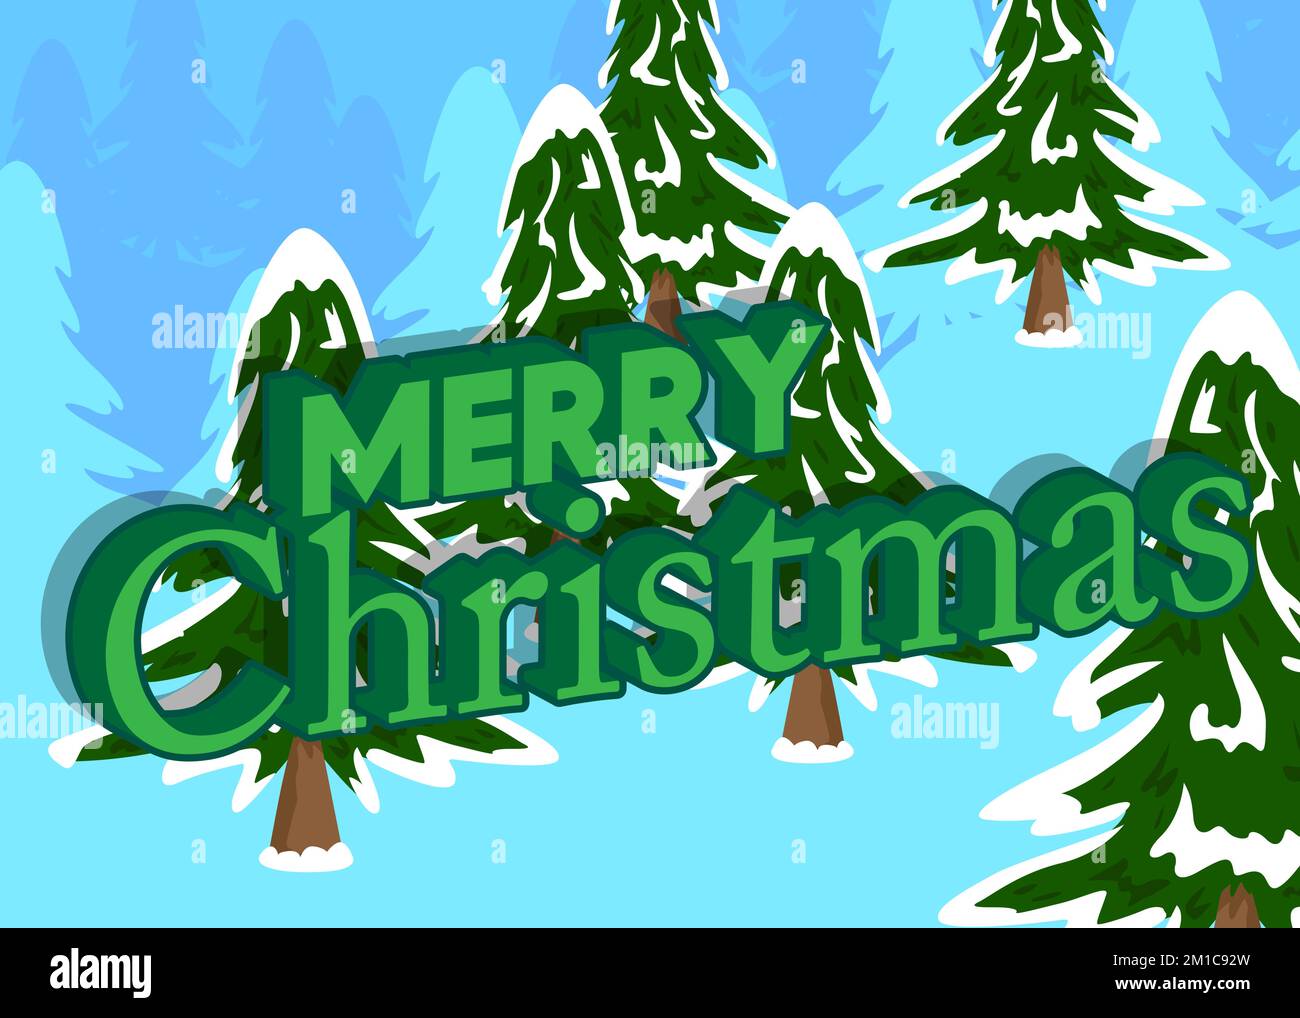 Pine Tree with Merry Christmas text. Winter holiday vector cartoon illustration. Stock Vector